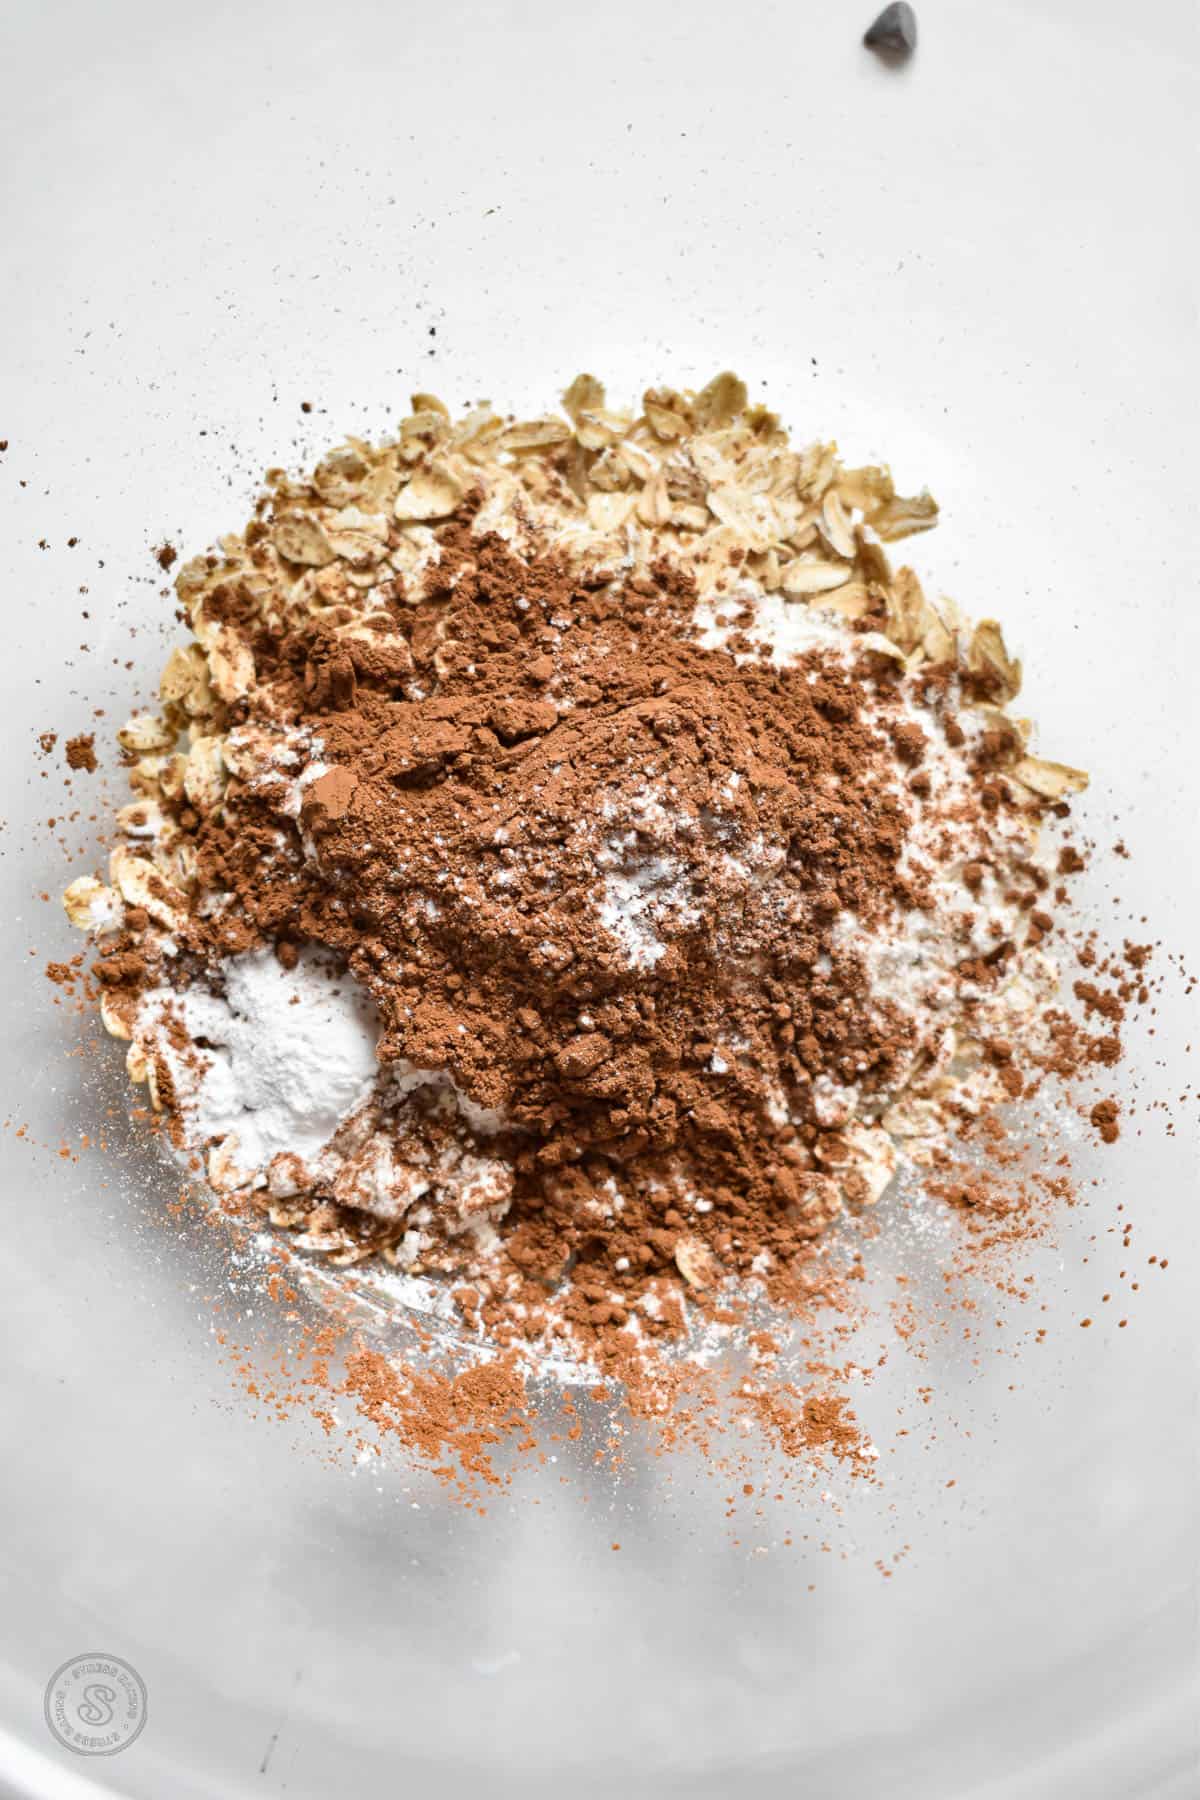 Dry ingredients topped with cocoa powder in a clear mixing bowl